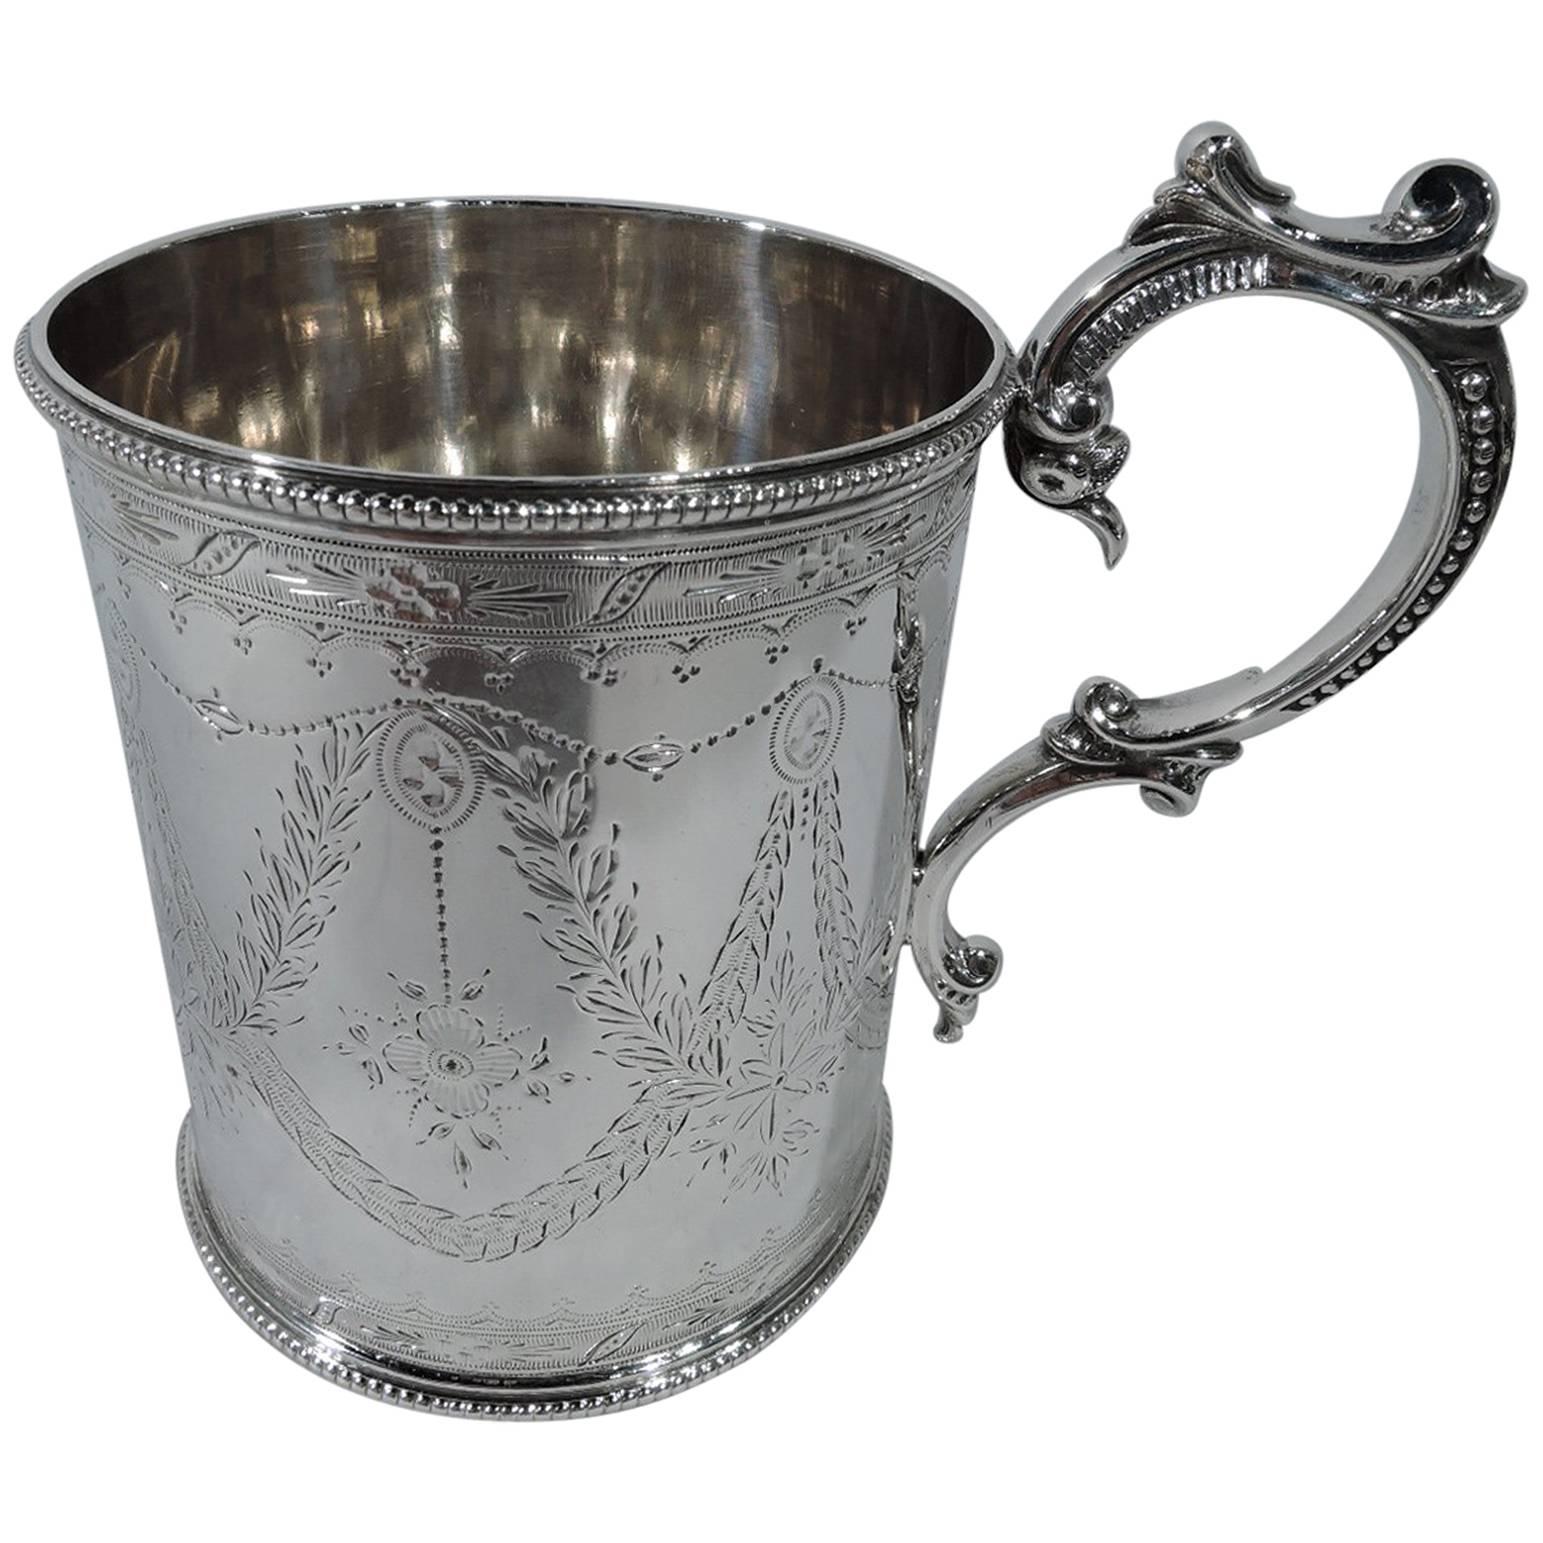 Antique English Victorian Neoclassical Sterling Silver Baby Cup